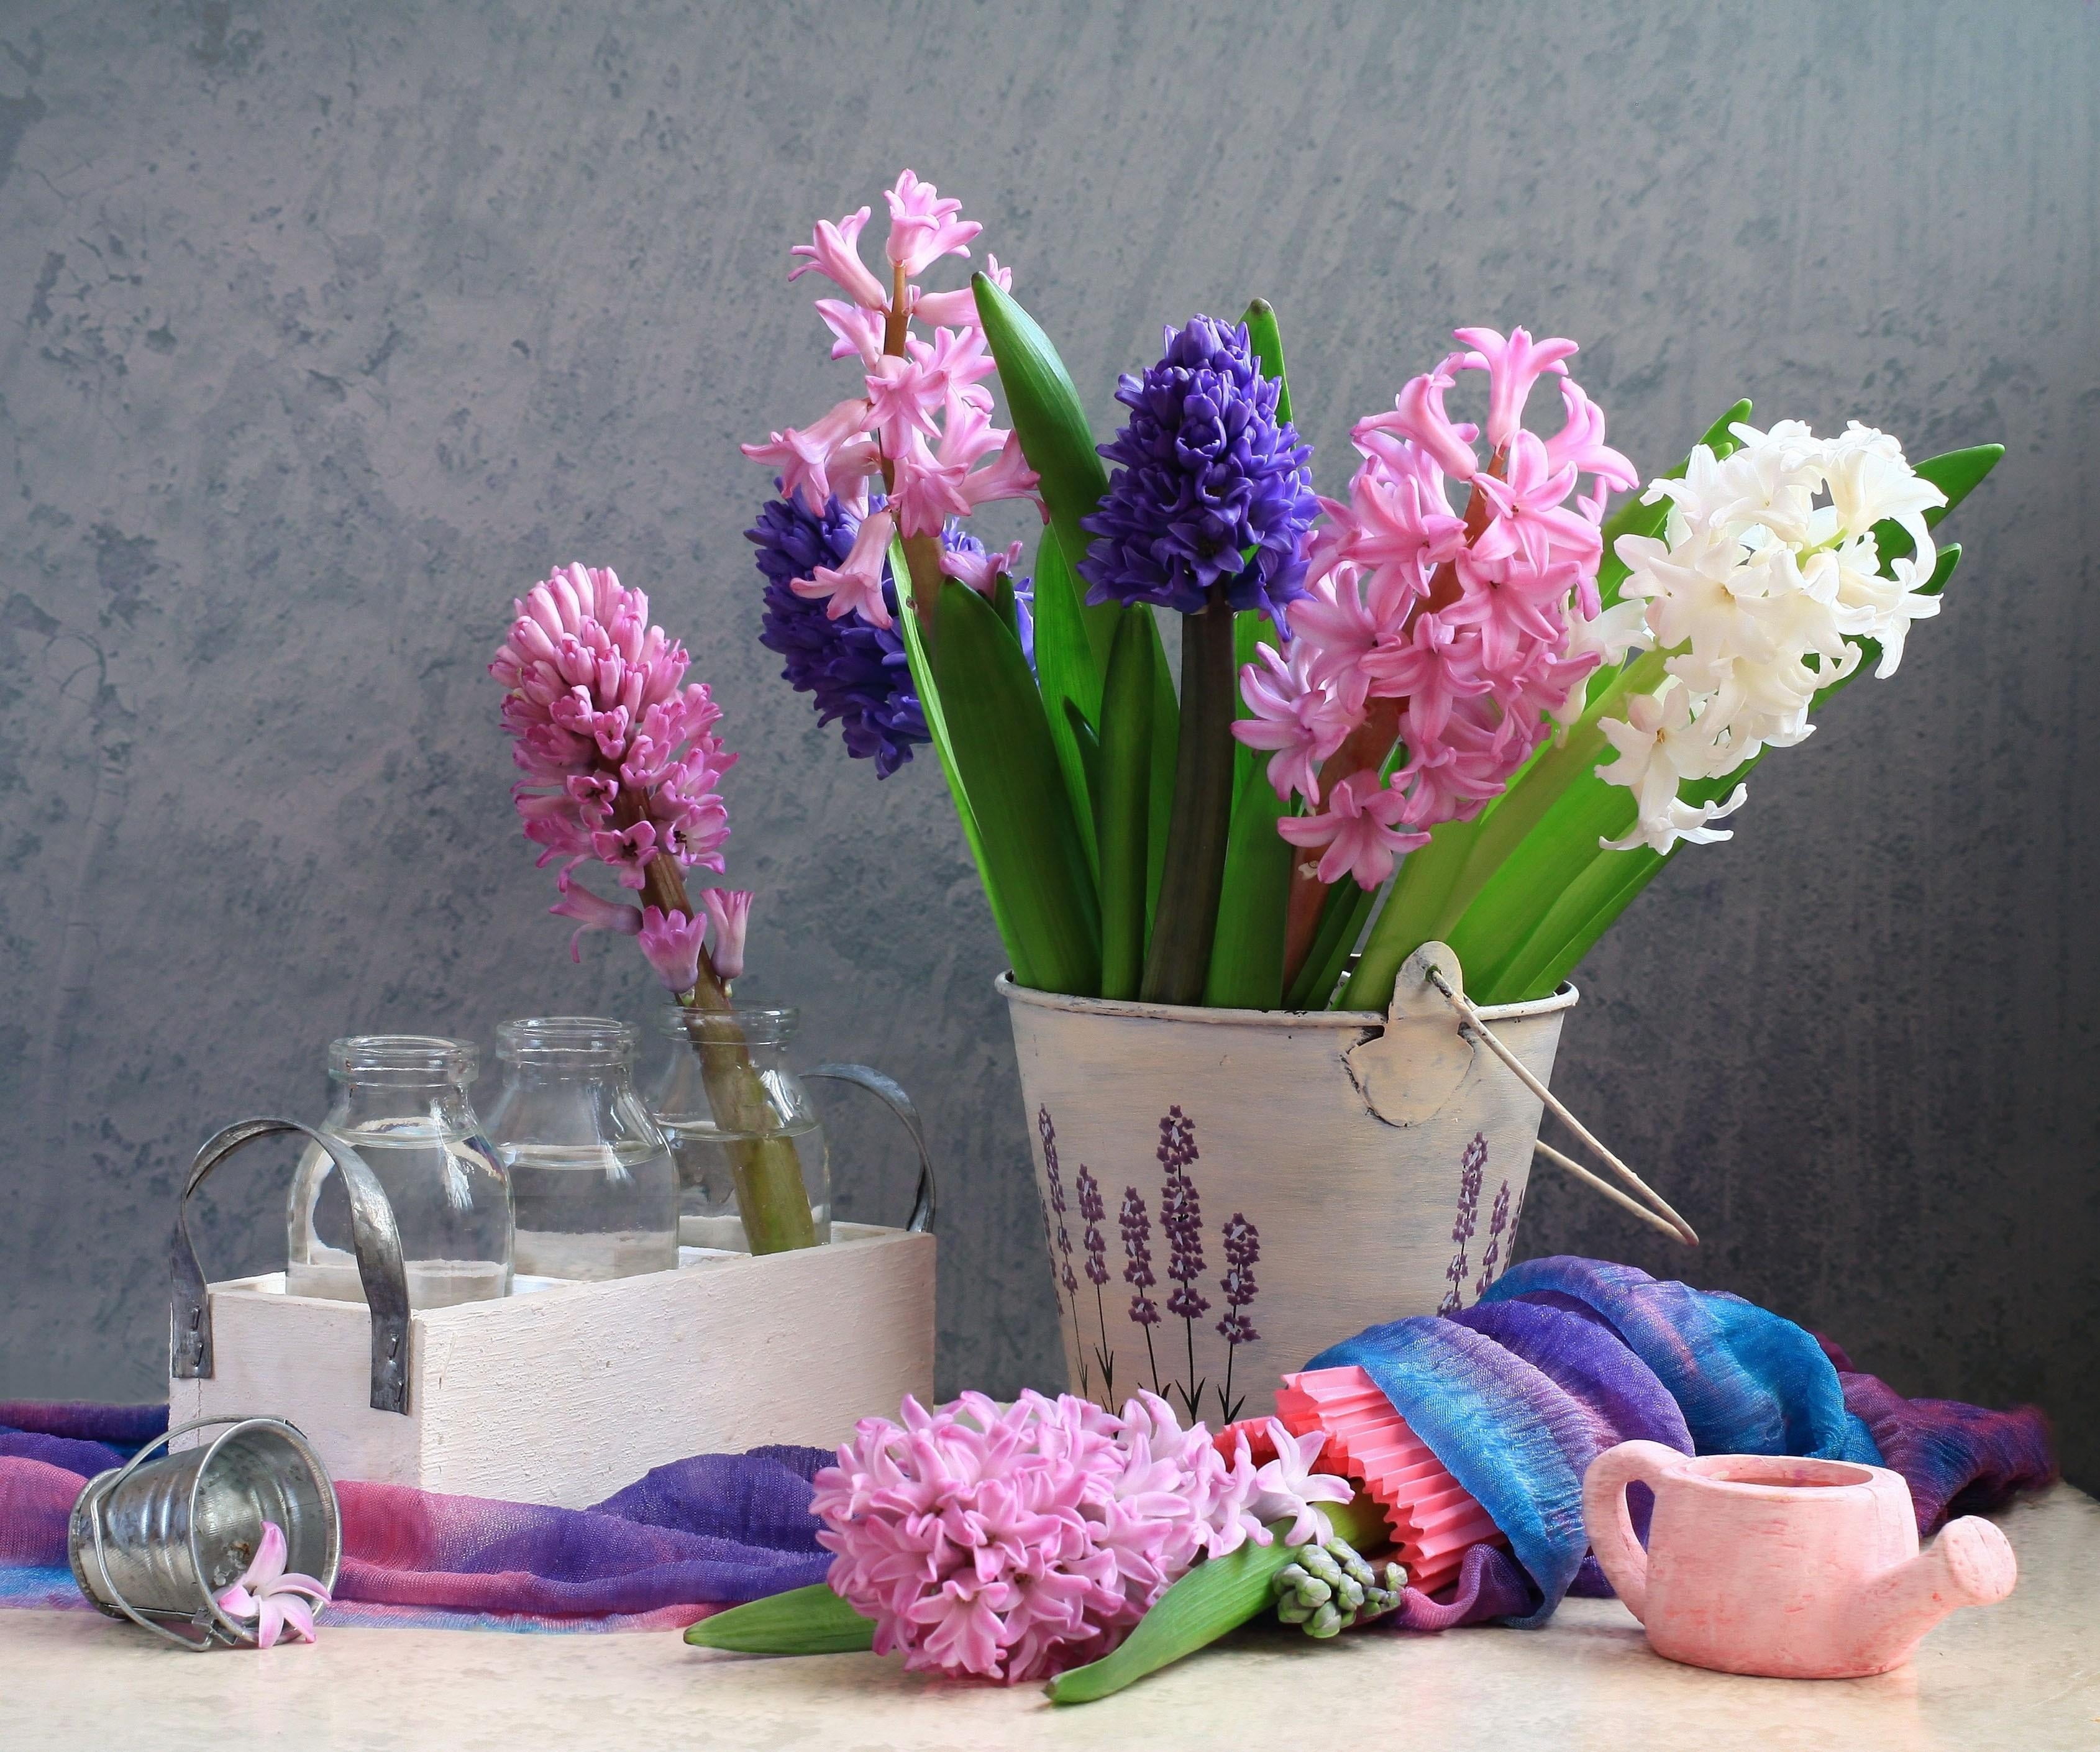 assorted flowers, hyacinths, spring, bucket, bottle, watering can